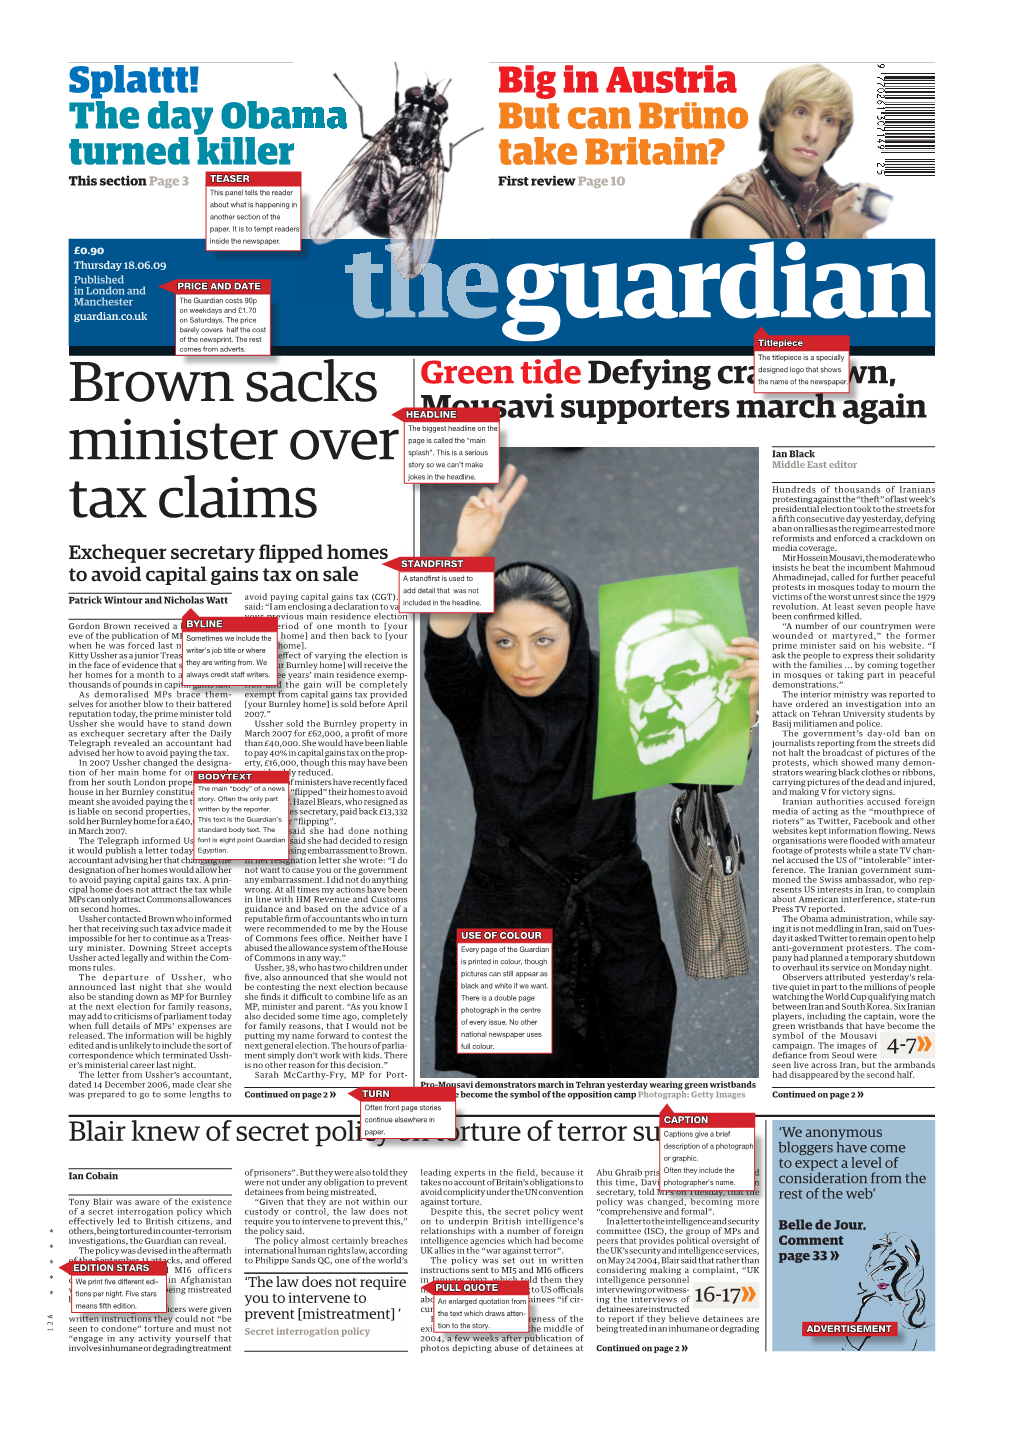 Brown Sacks Minister Over Tax Claims